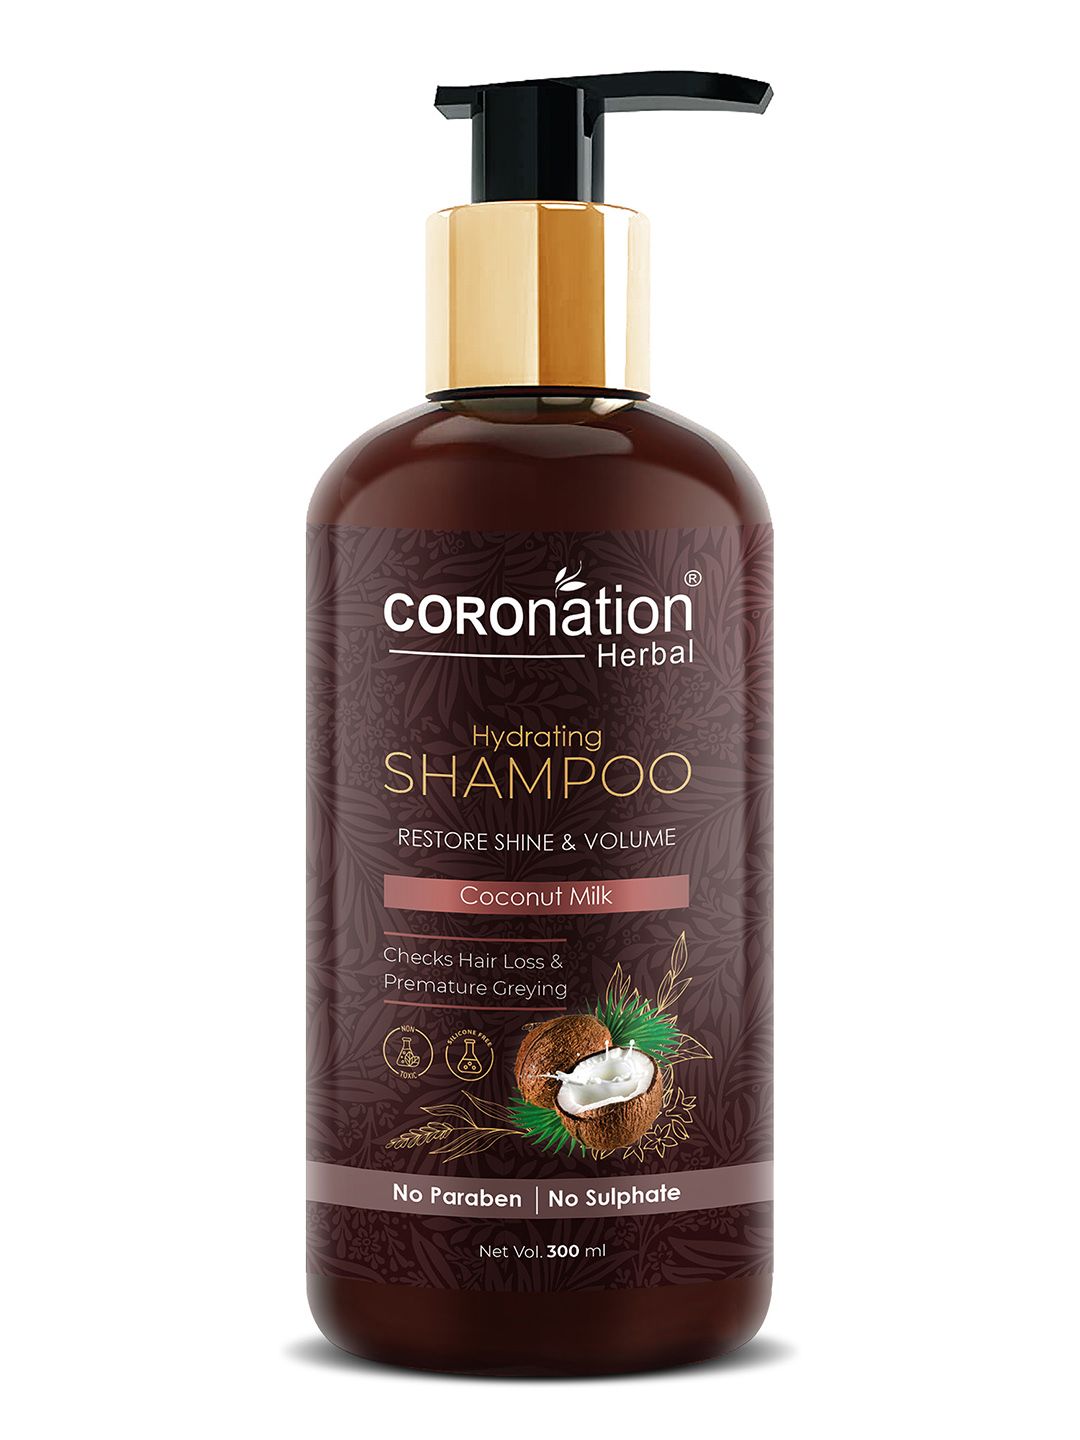 COROnation Herbal Hydrating Shampoo With Coconut Milk 300 ml Price in India